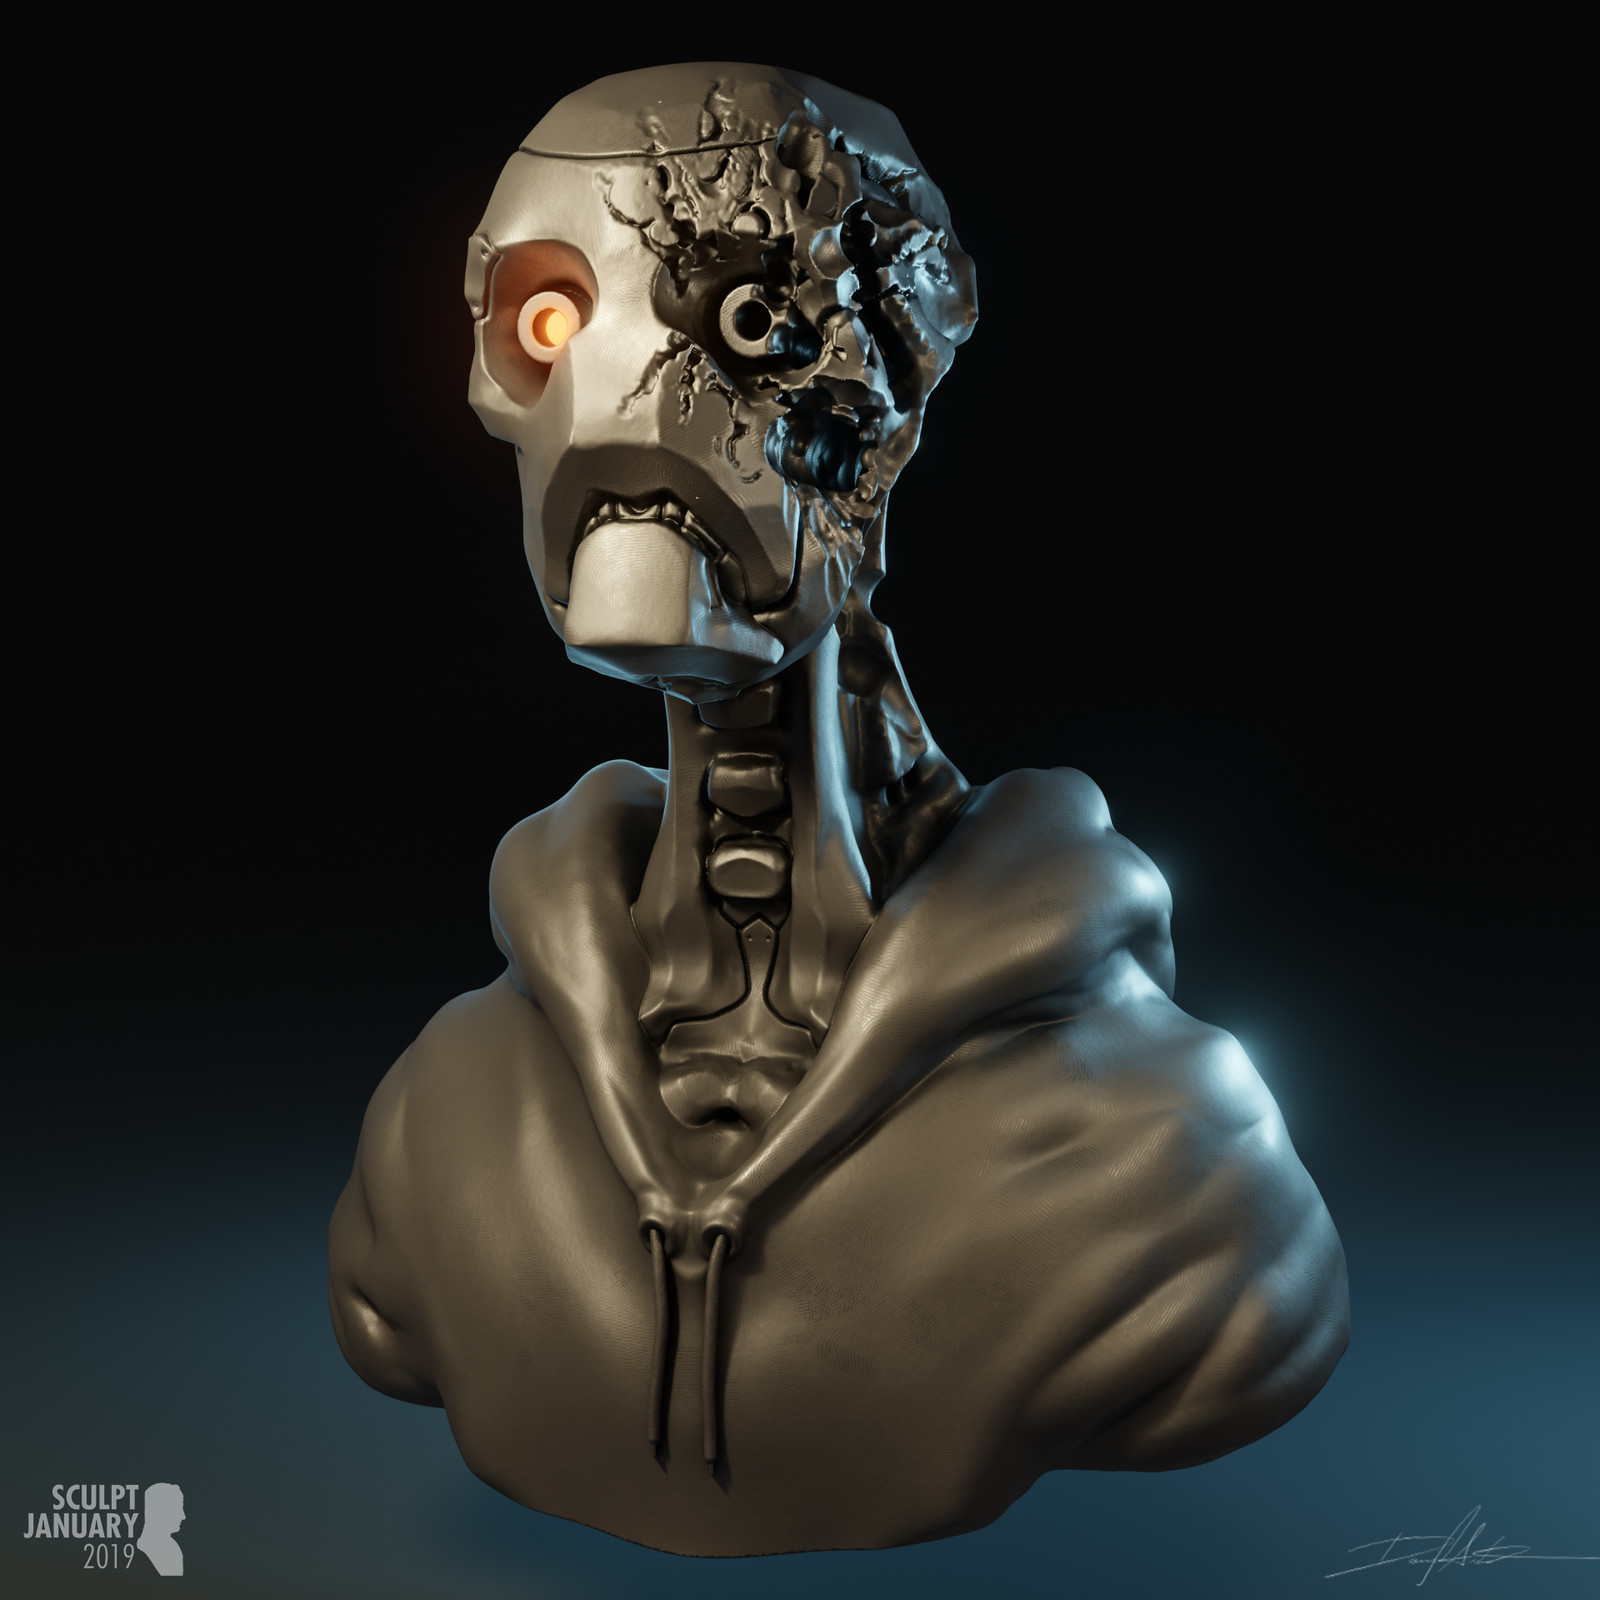 SCULPT JANUARY Day 18 - Damaged (attribute)